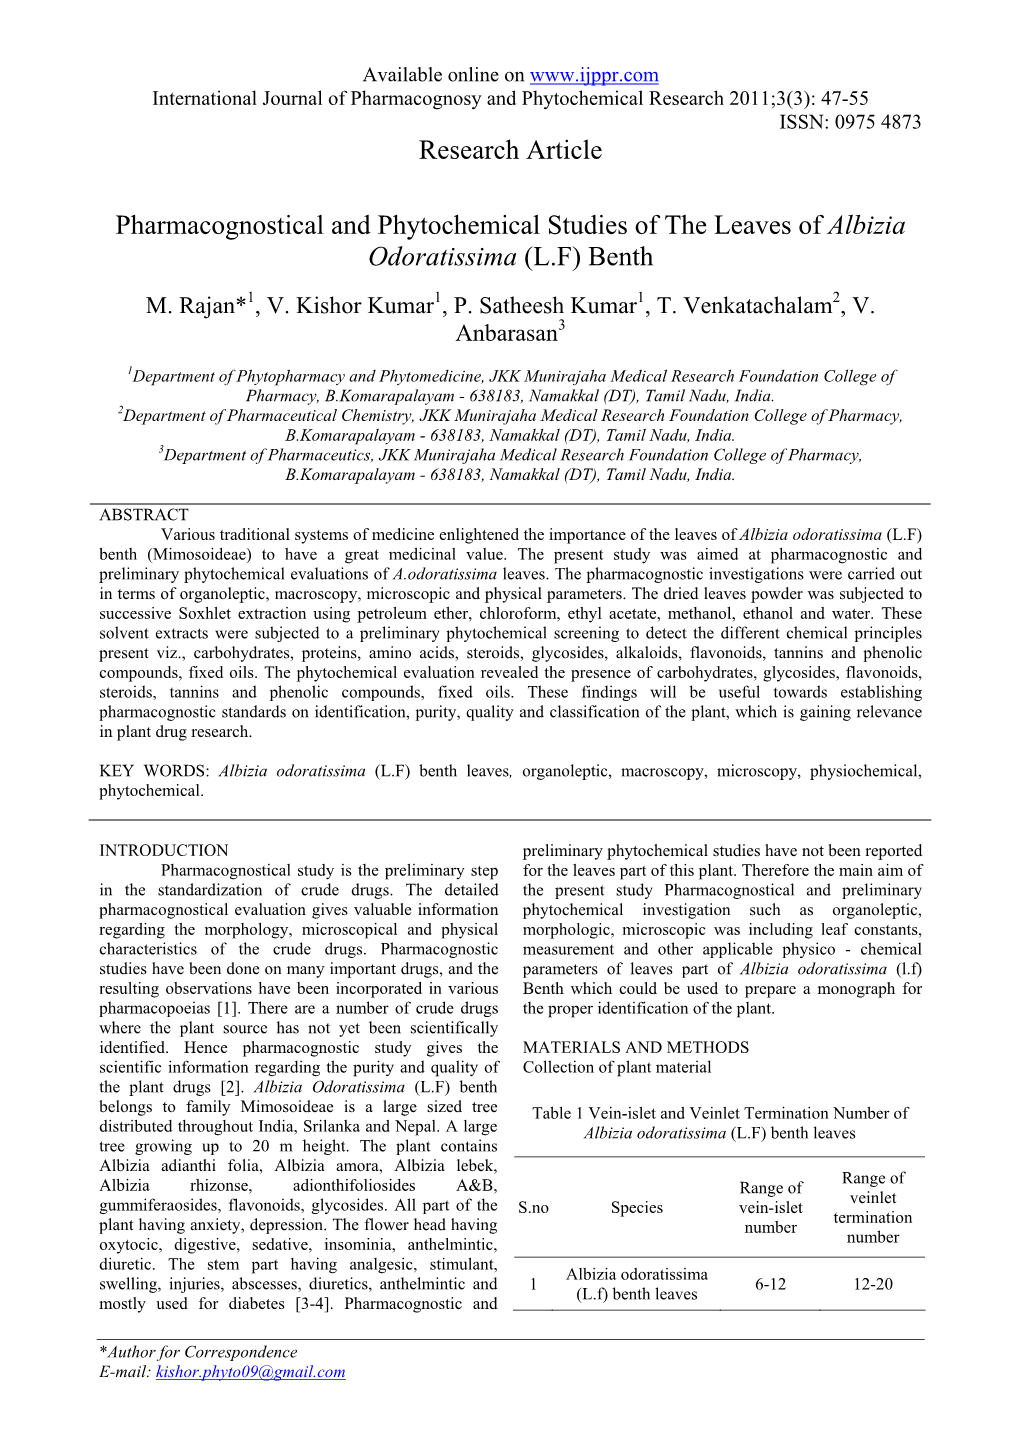 Pharmacognostical and Phytochemical Studies of the Leaves of Albizia Odoratissima (L.F) Benth